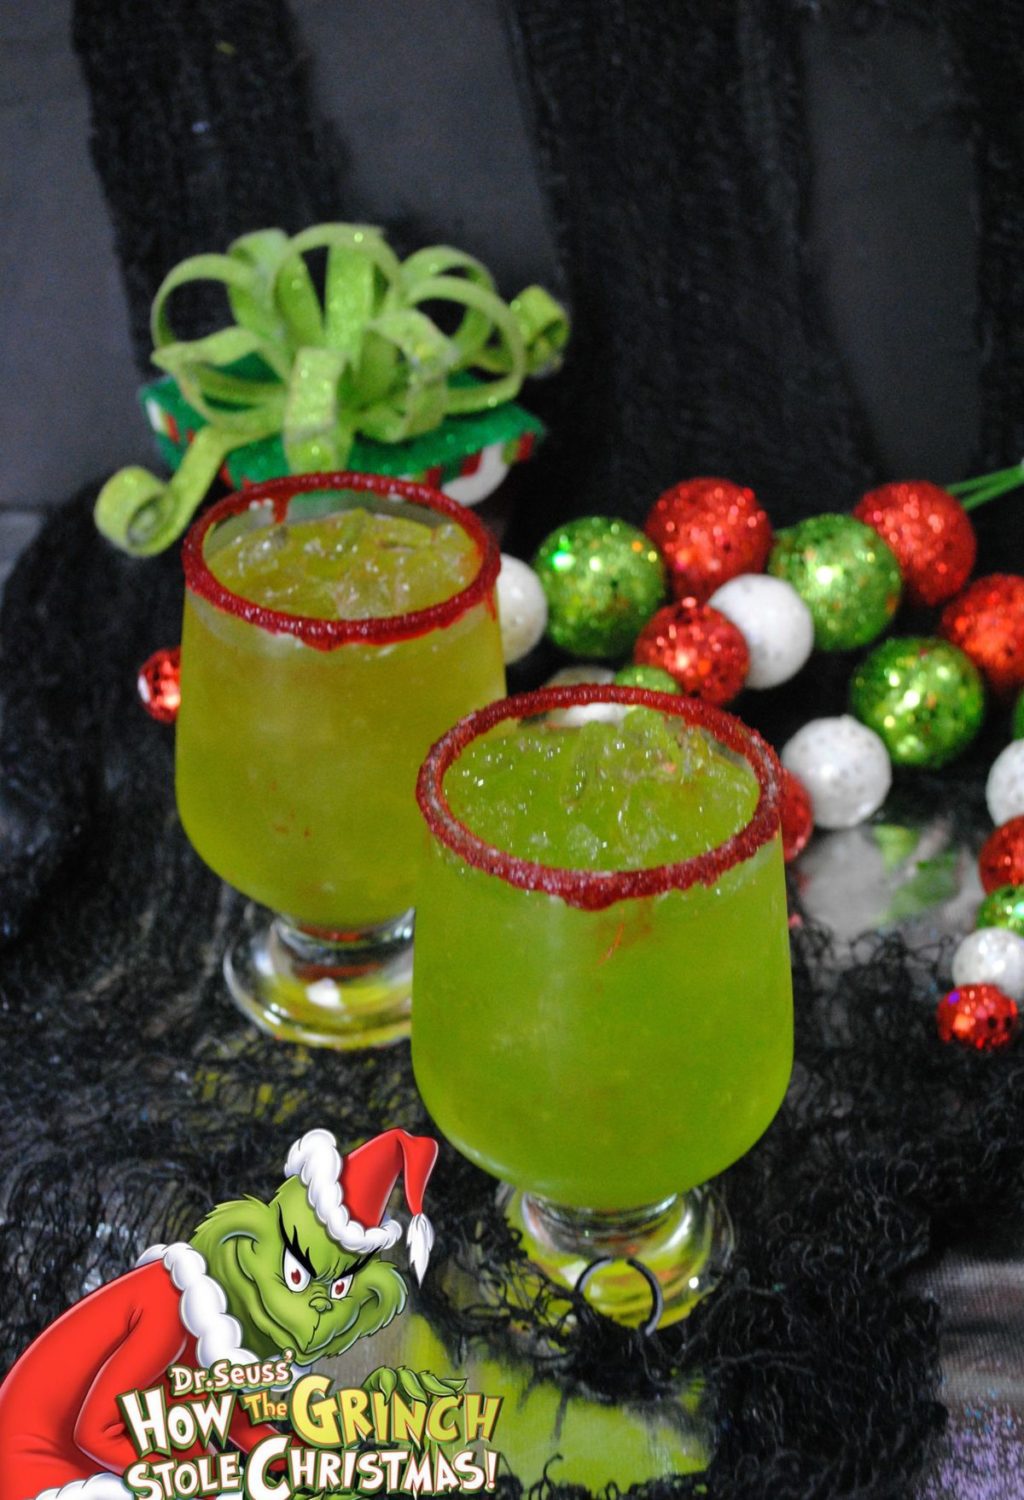 Two glasses of green drink with santa claus decorations.